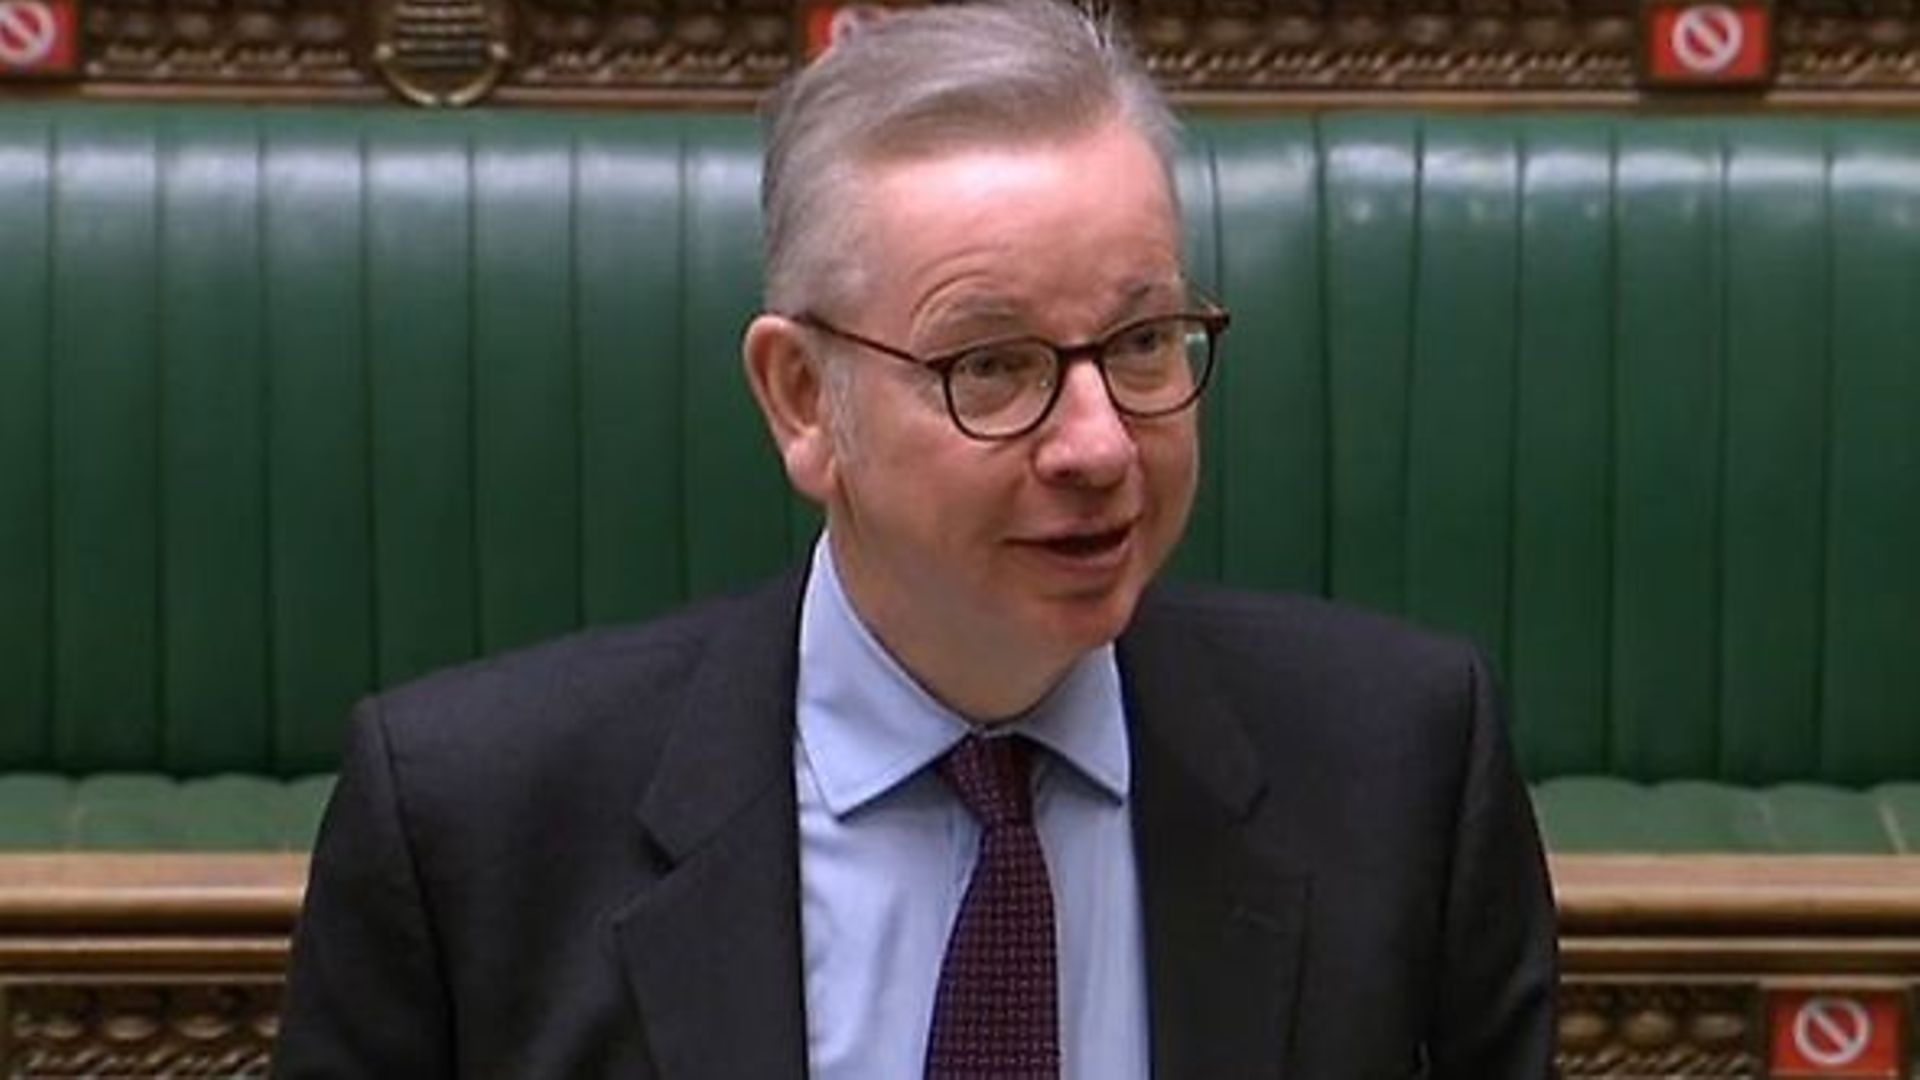 Michael Gove in the House of Commons - Credit: Parliament Live